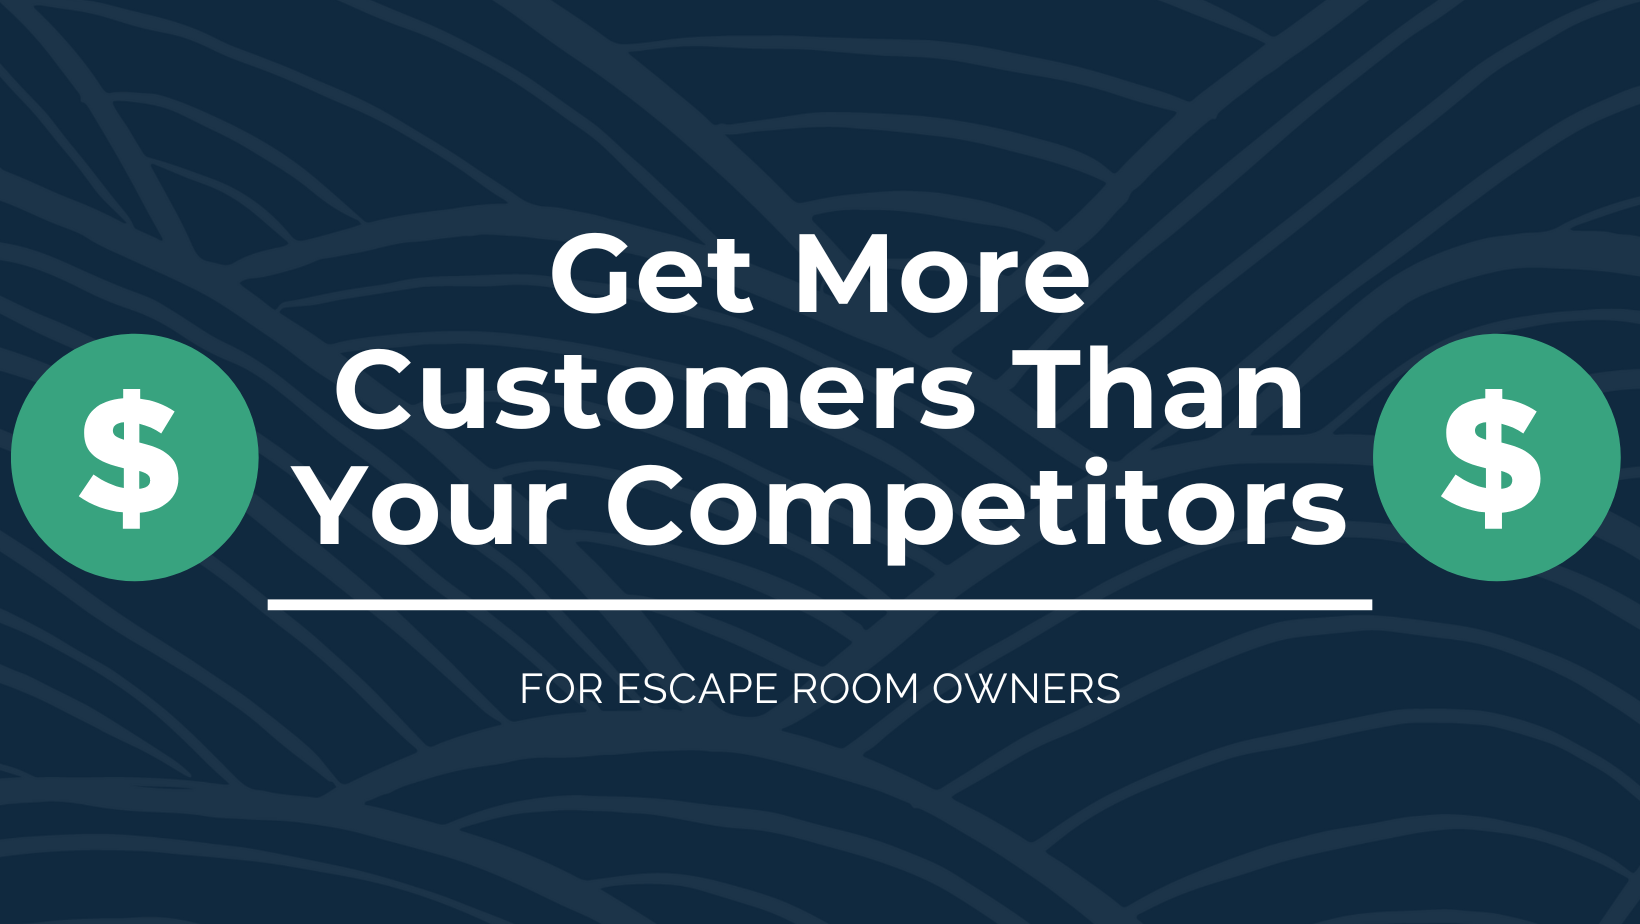 Get More Customers than Your Competing Escape Rooms